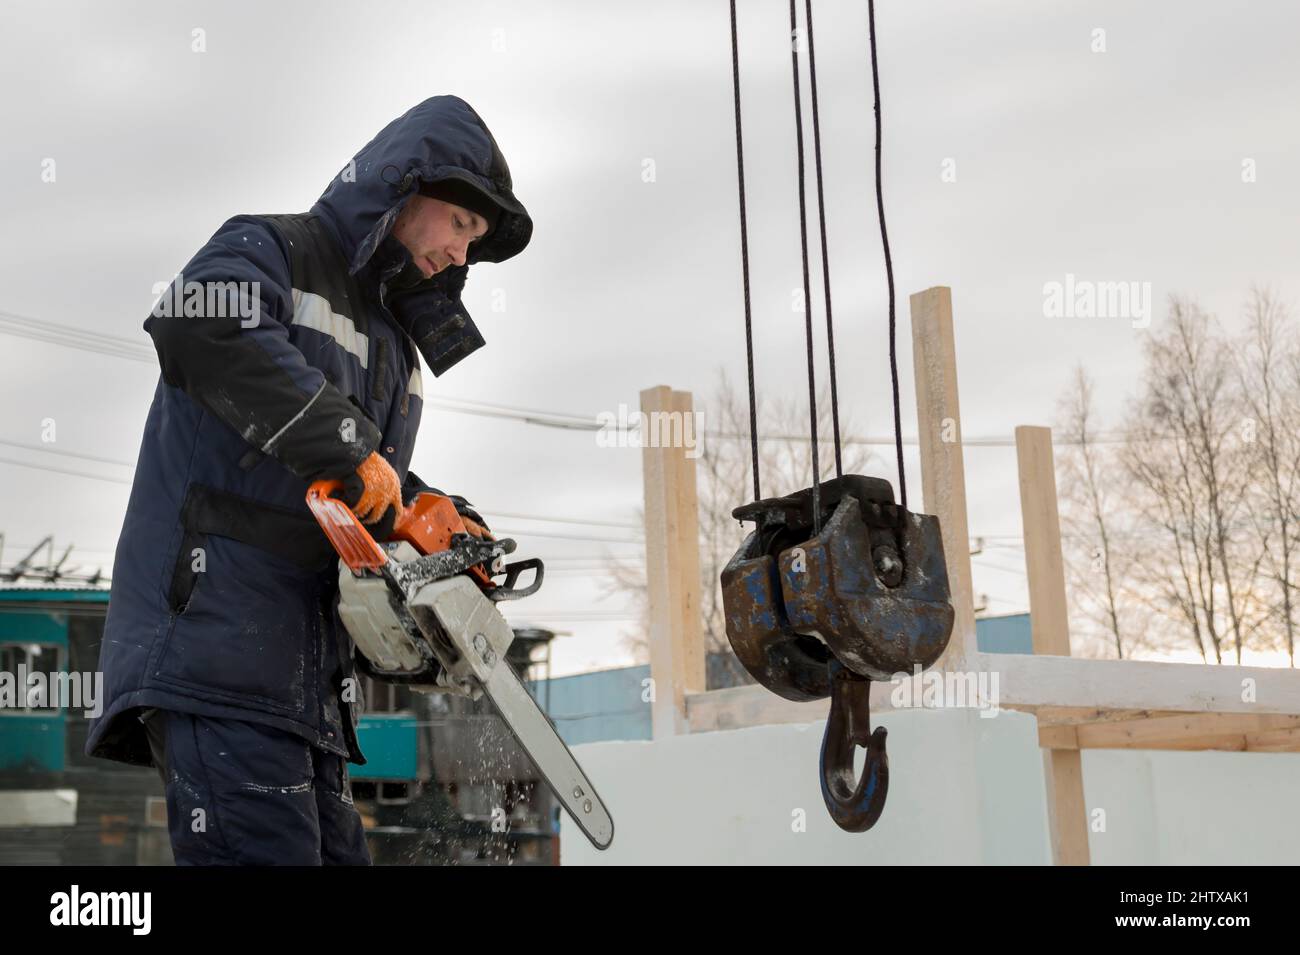 Worker with a chainsaw in hand at the assembly site Stock Photo